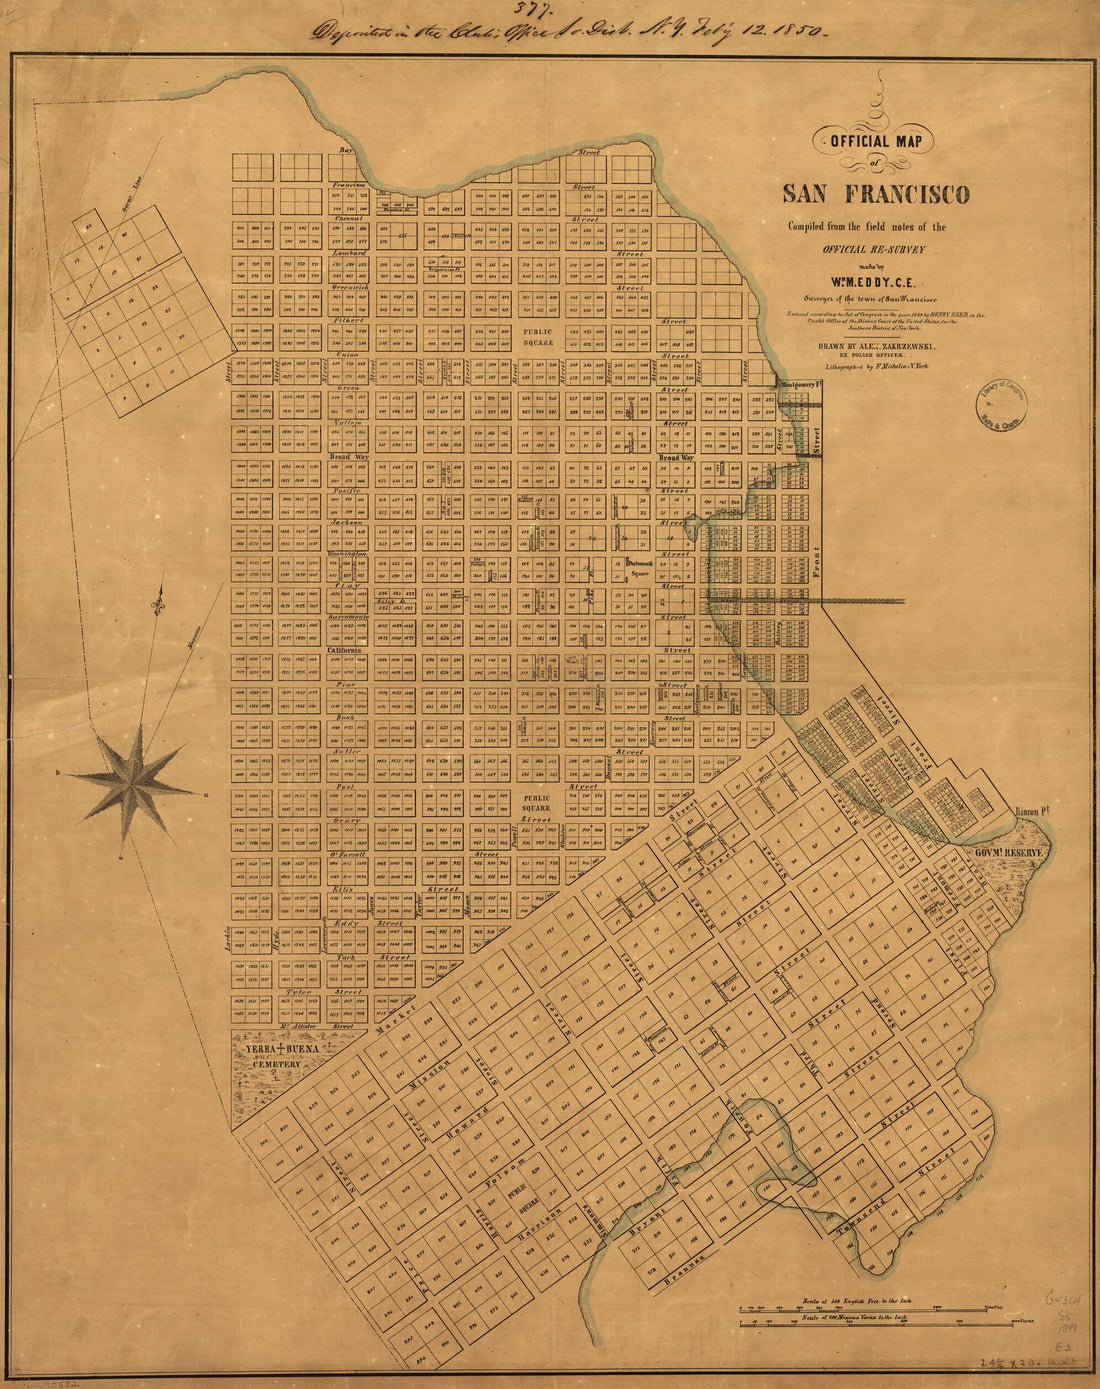 This old map of Official Map of San Francisco from 1849 was created by William M. Eddy, Francis Michelin, Alexander Zakreski in 1849